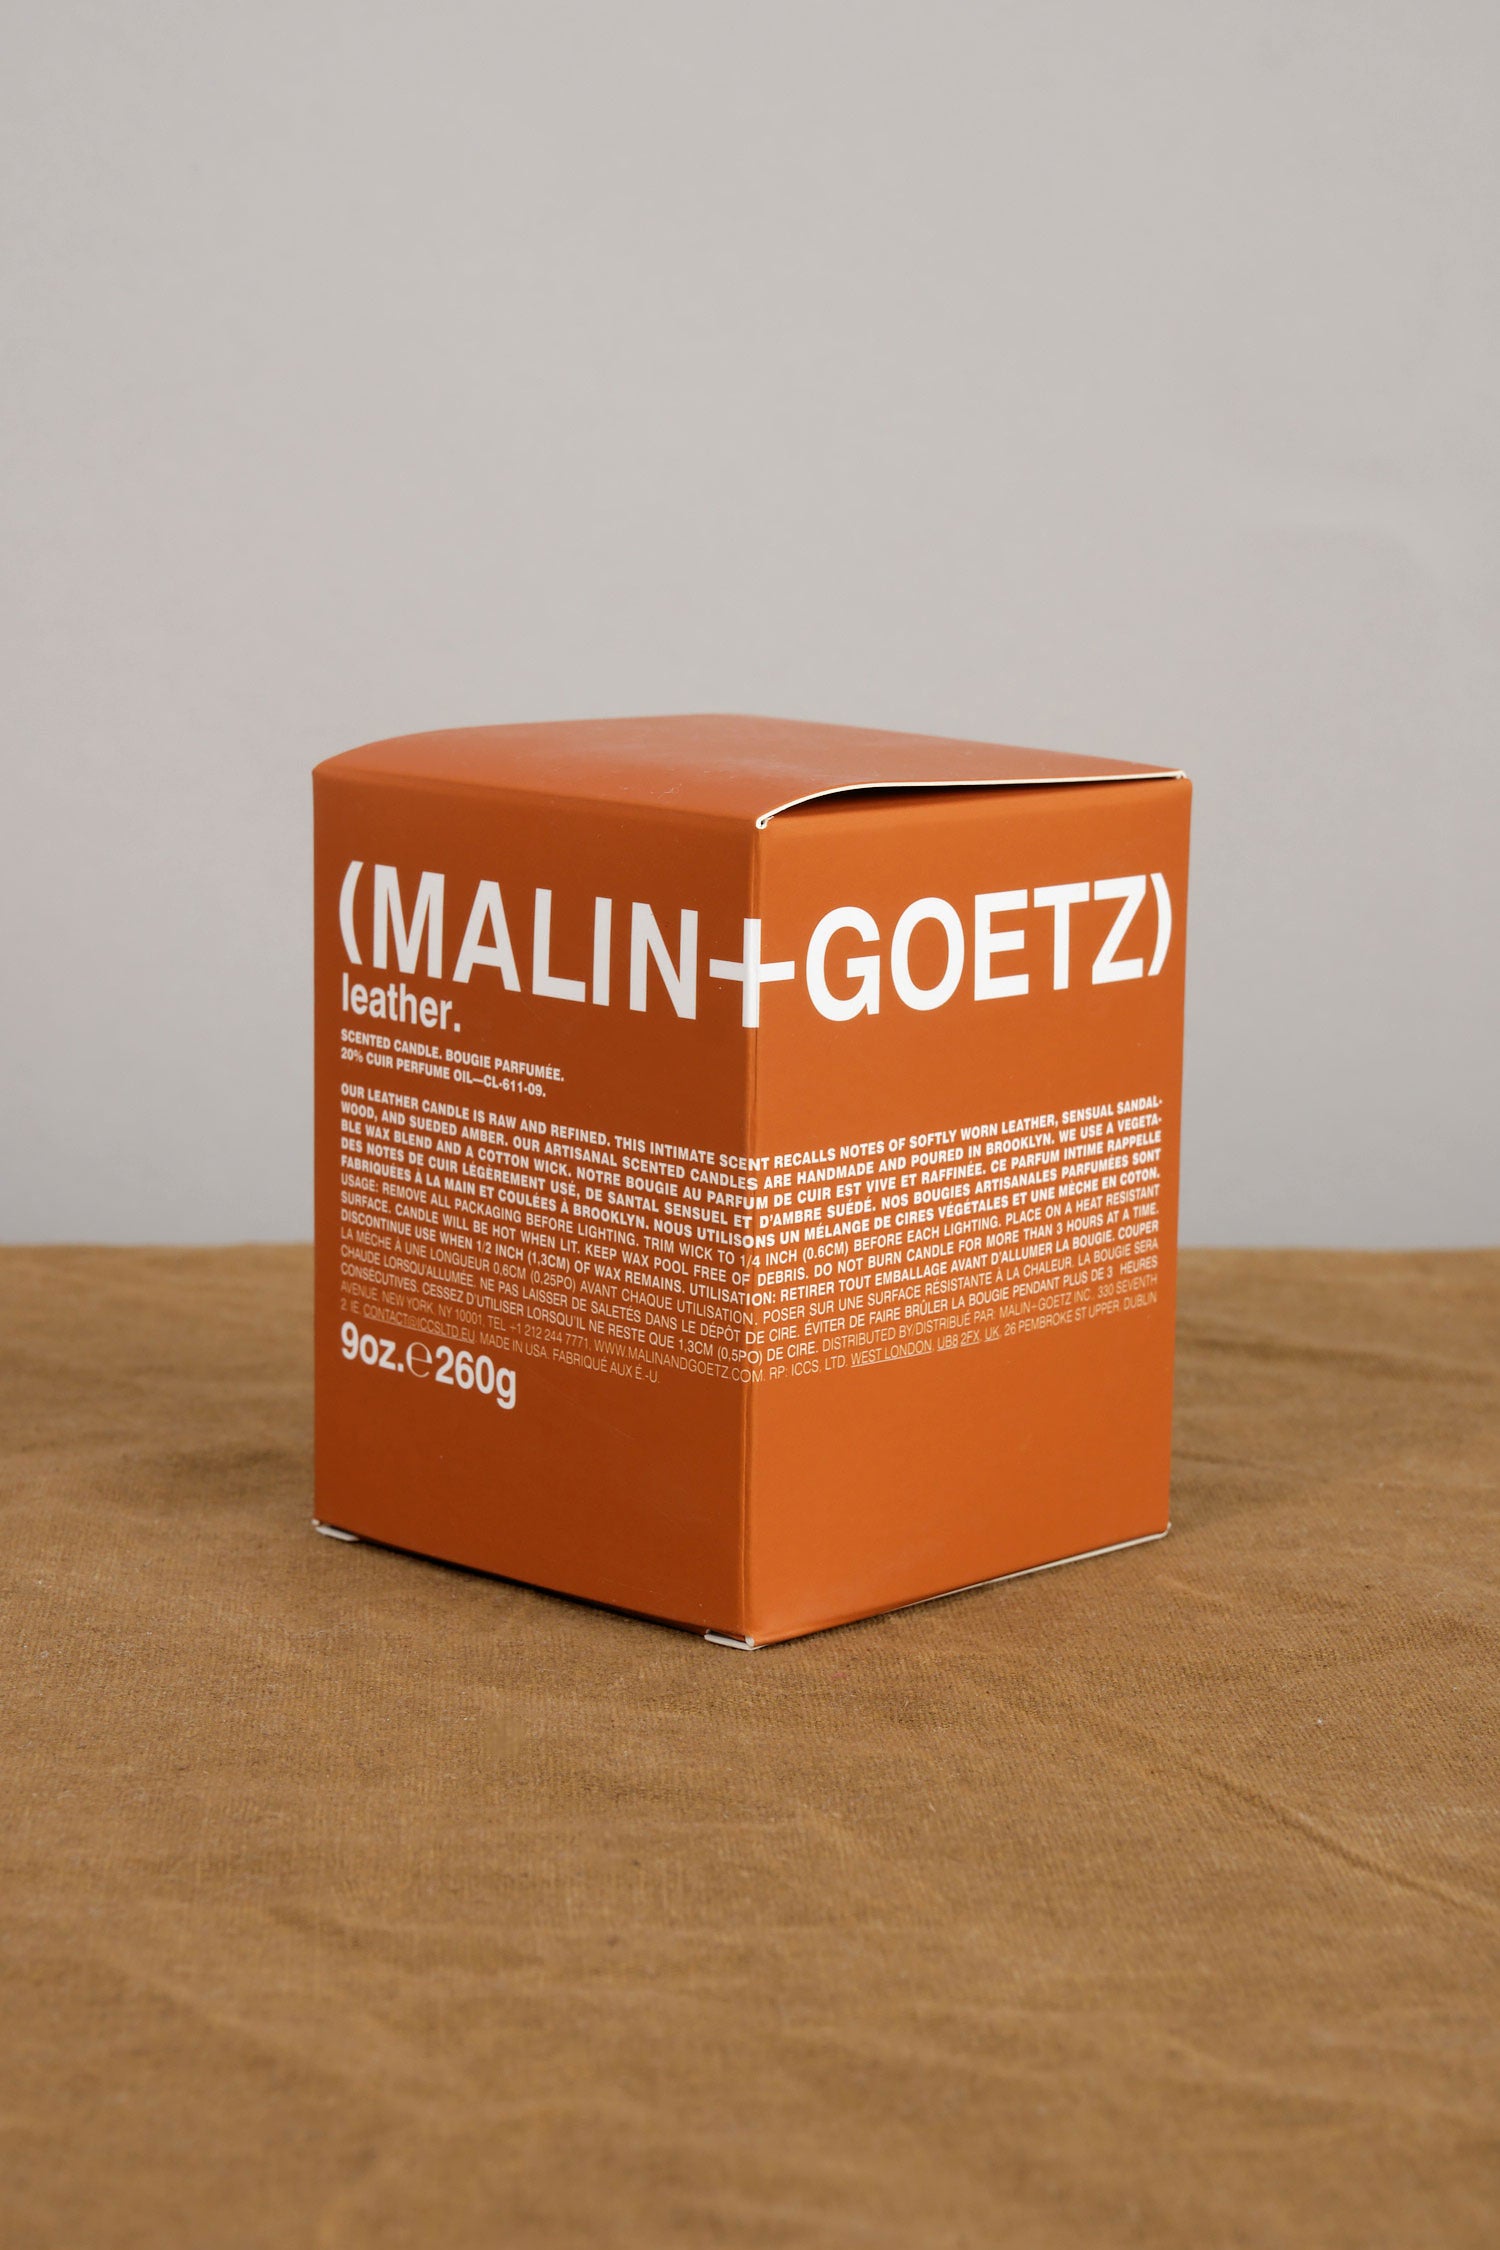 Malin + Goetz natural wax blended candle